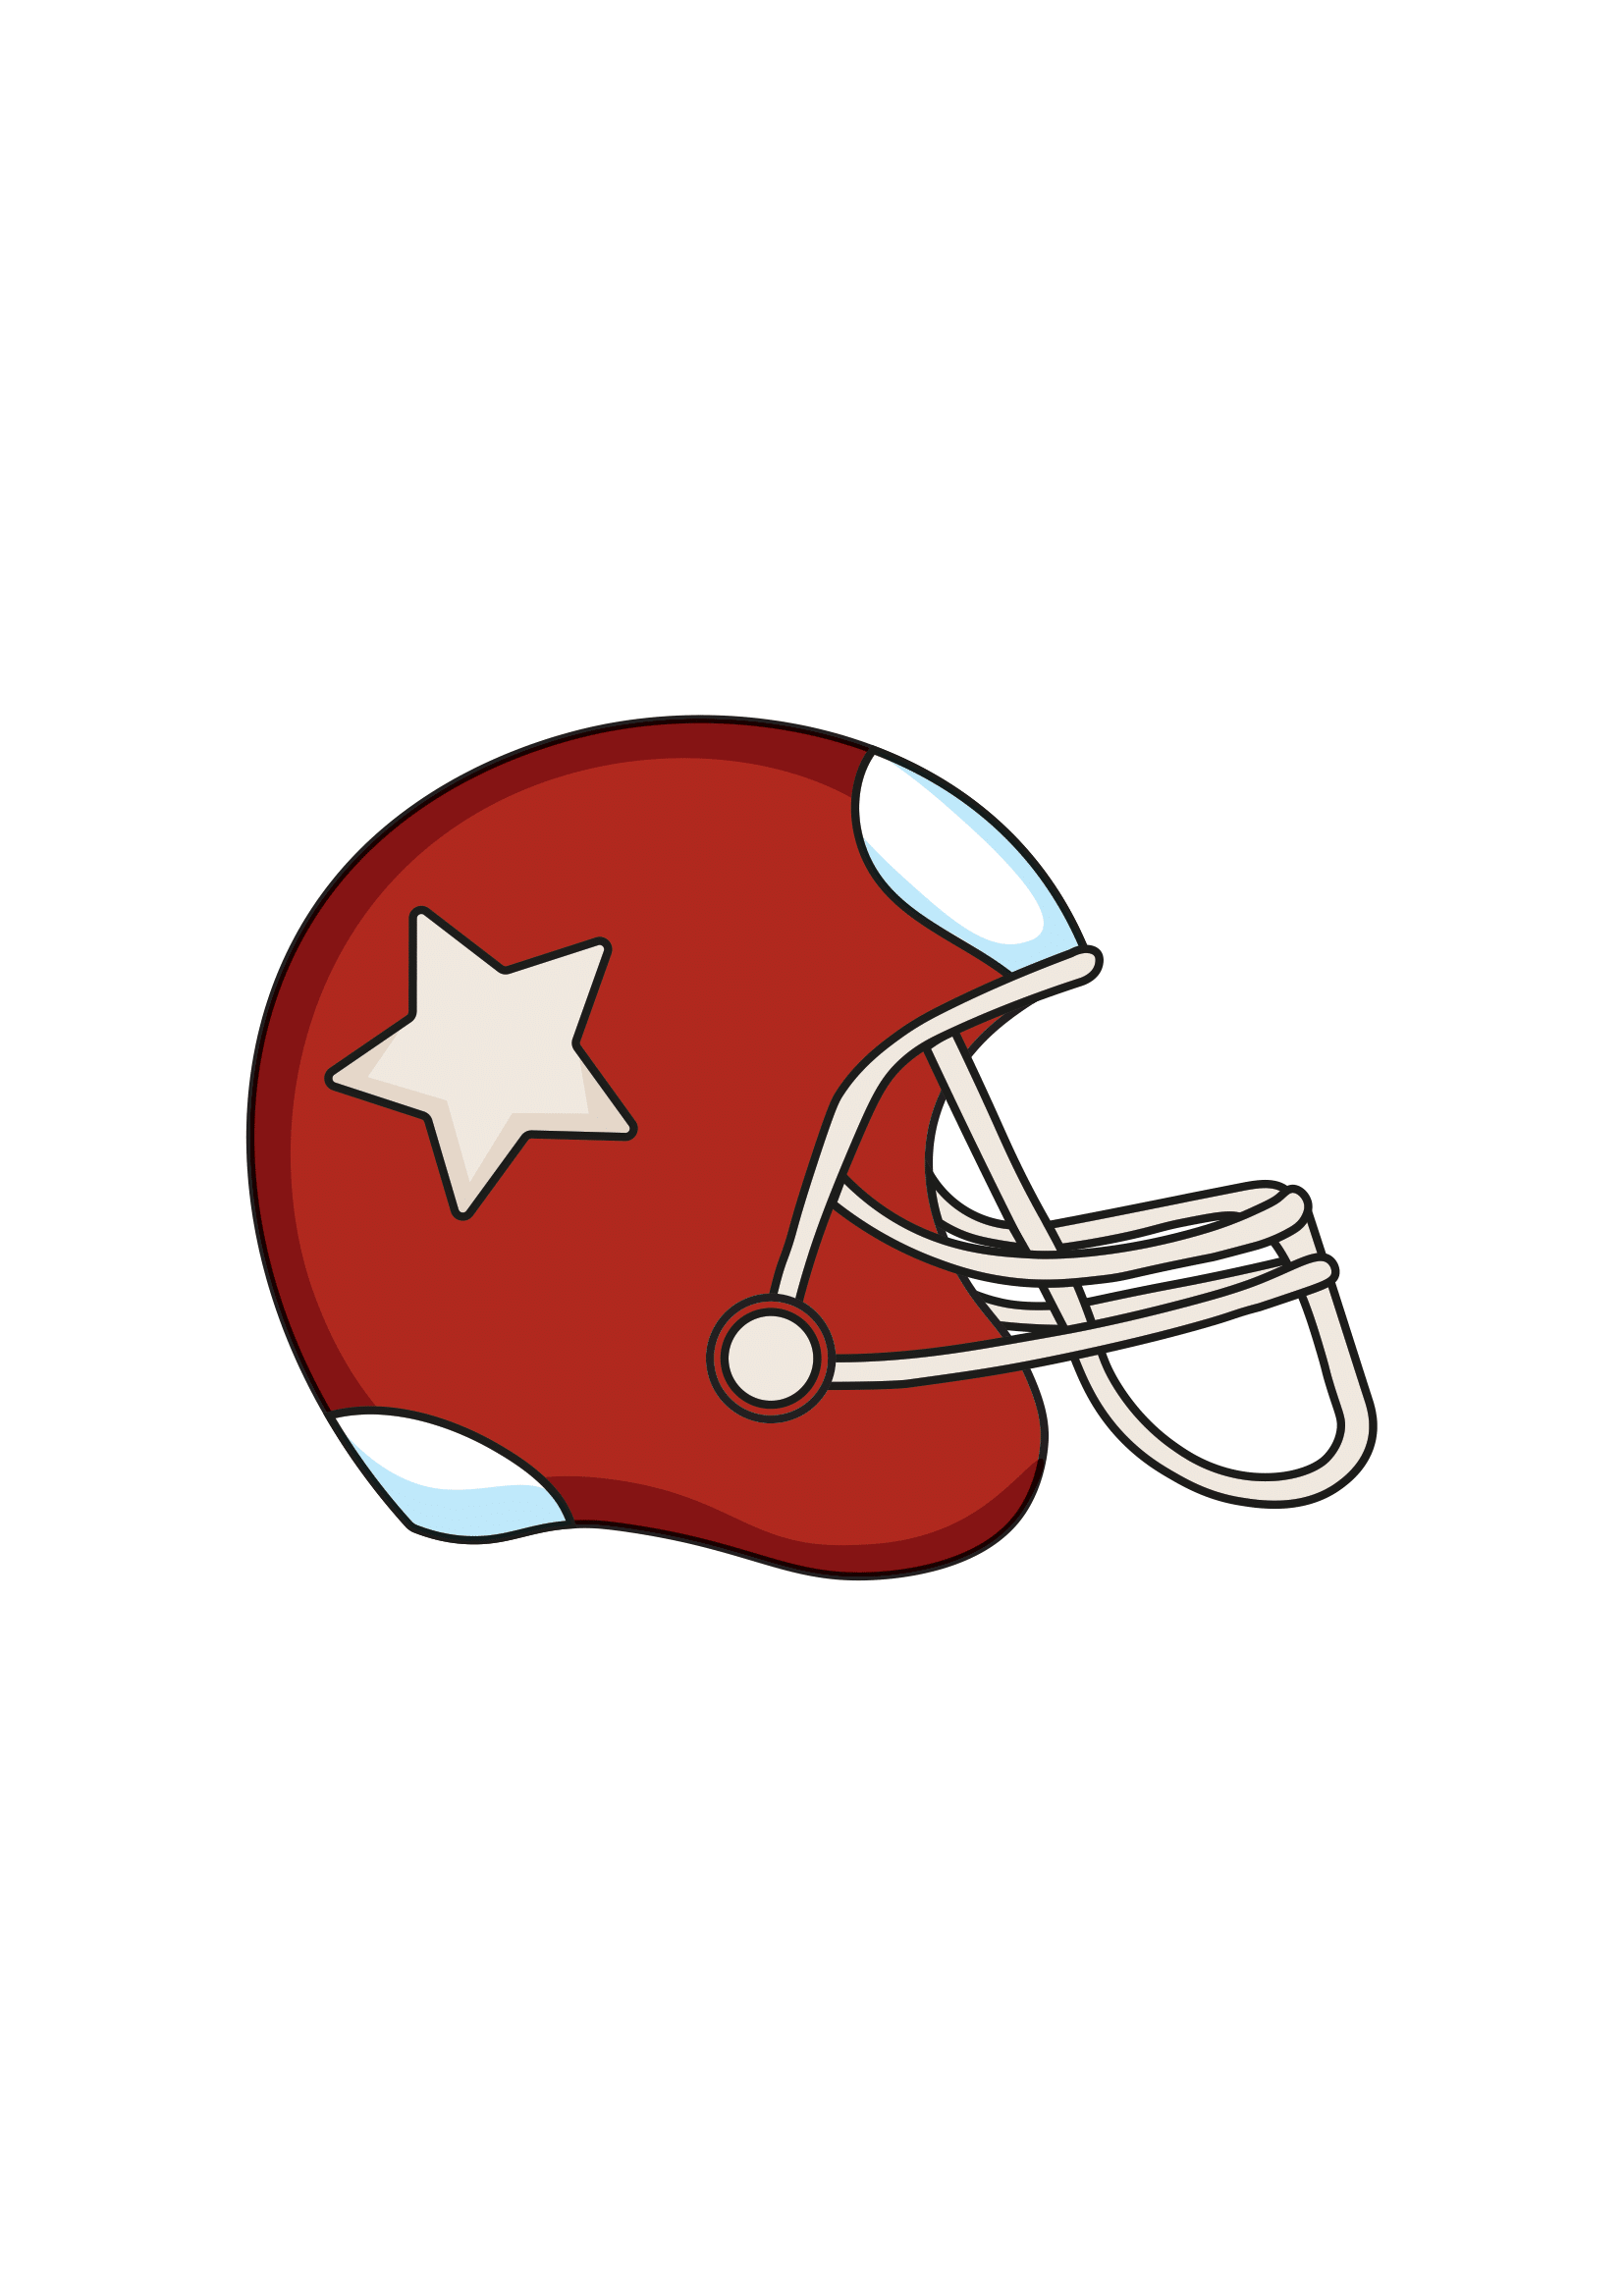 How to Draw A Football Helmet Step by Step Printable